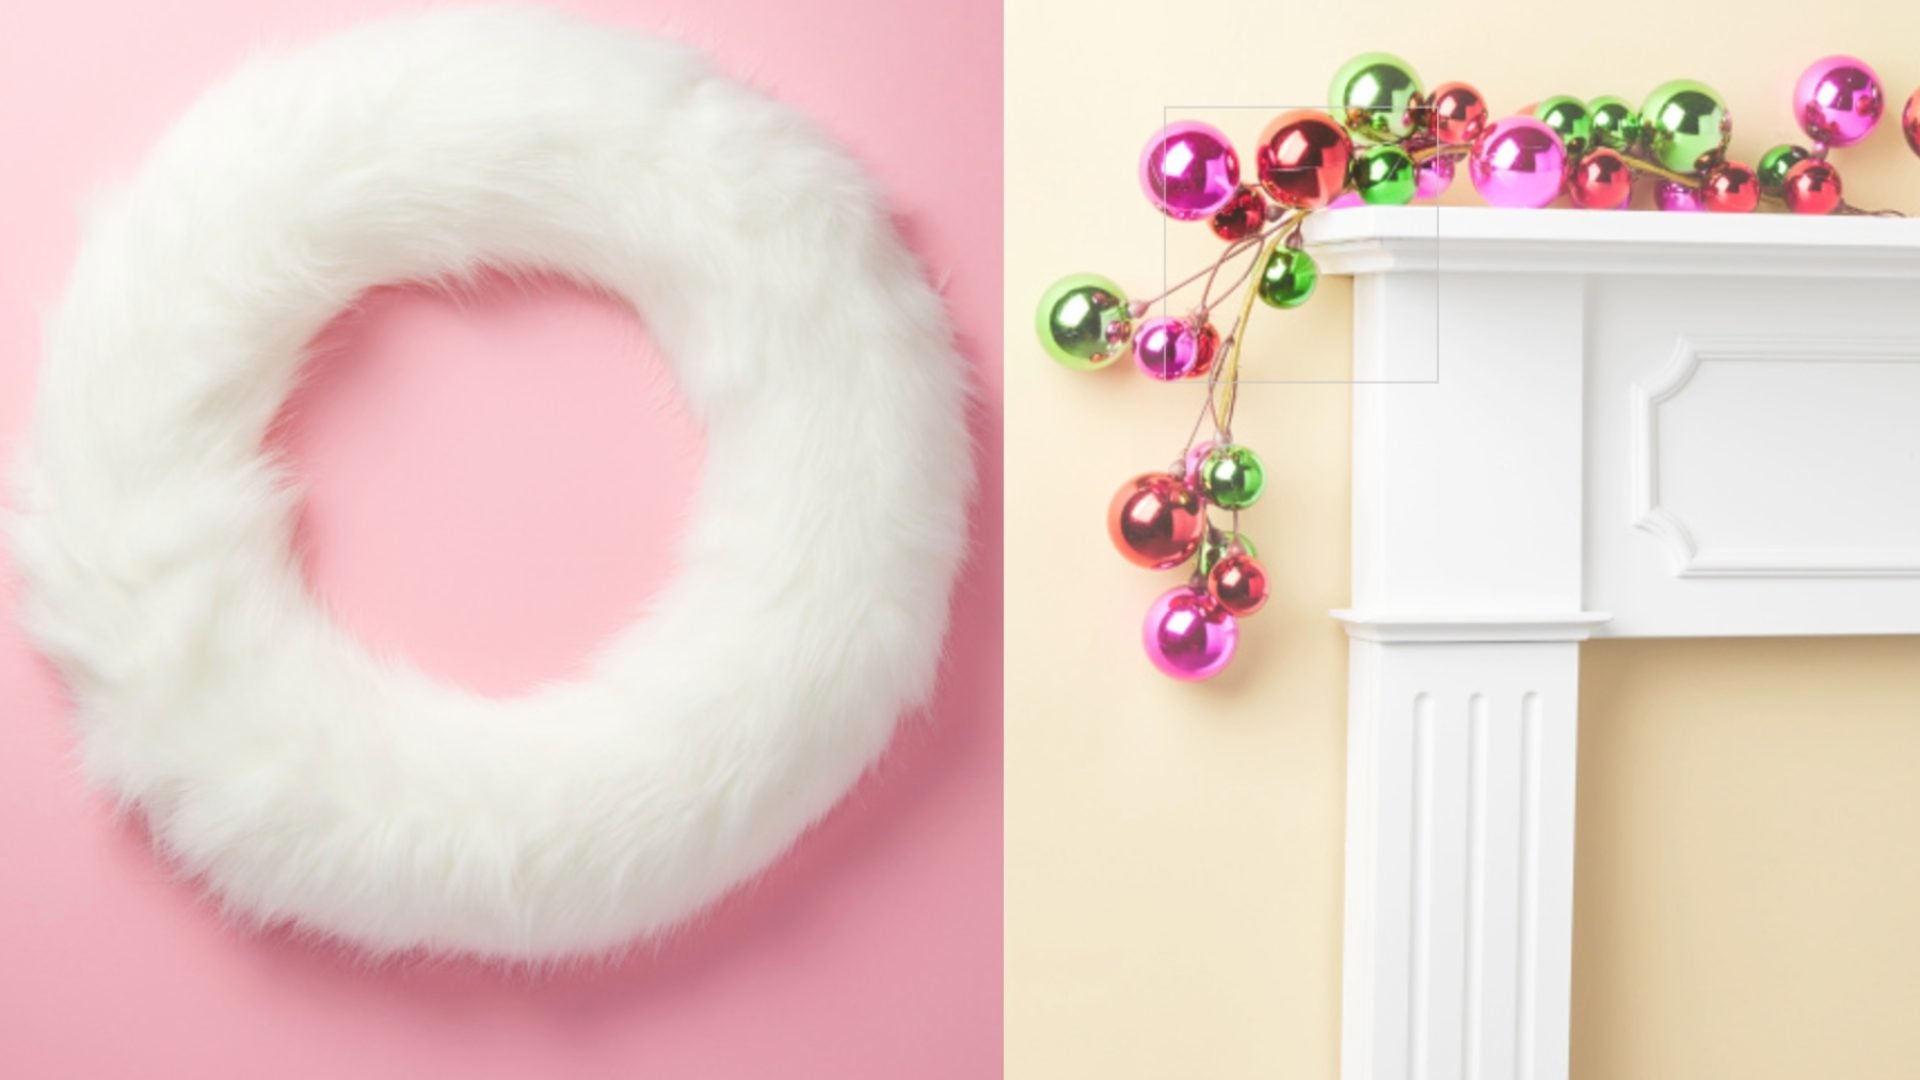 How To Do Holiday Decor But Make It Glam With Help From HomeGoods